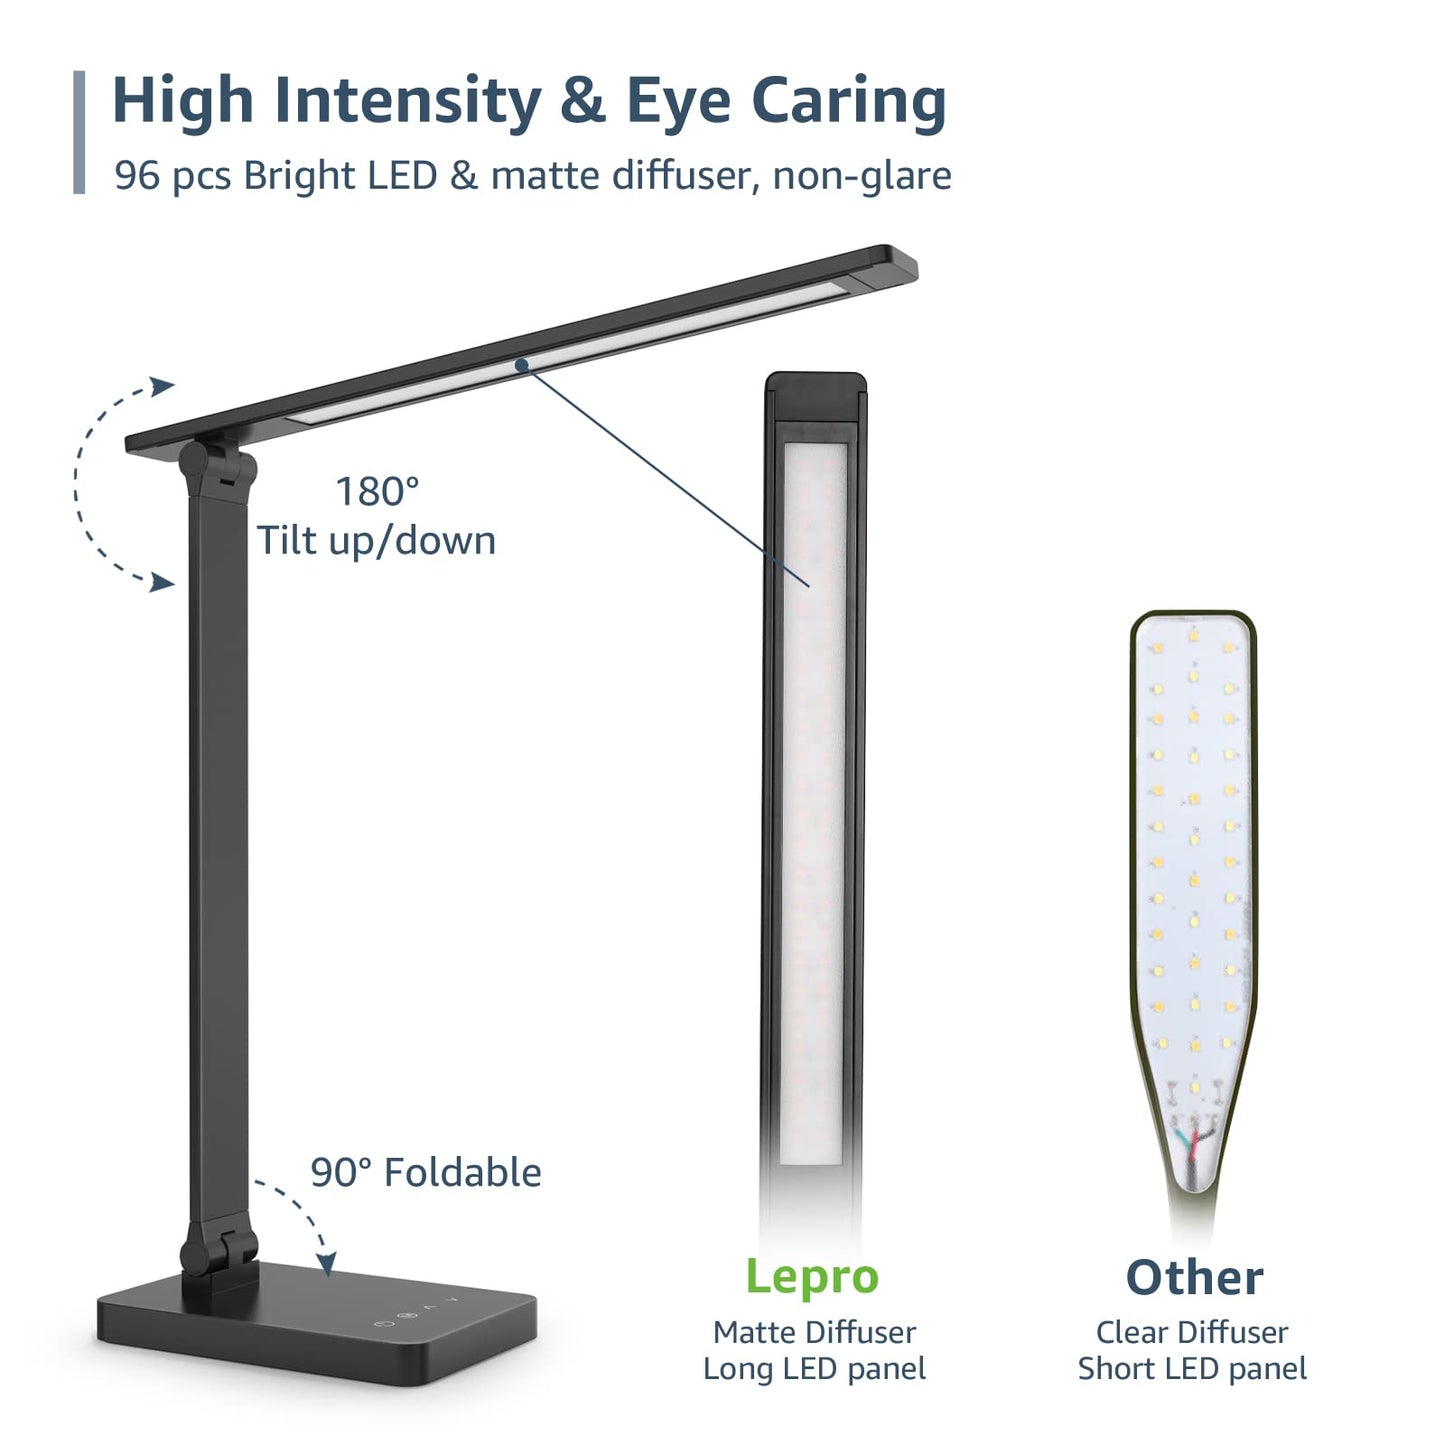 Lepro LED Desk Lamp for Home Office, 9W Metal Desk Light, Touch Control Desktop Dimmable, 3 Color Modes 5 Brightness Level, Eye Caring Task Lamp Reading, Crafts, School Supplies, Puzzle Light, Black